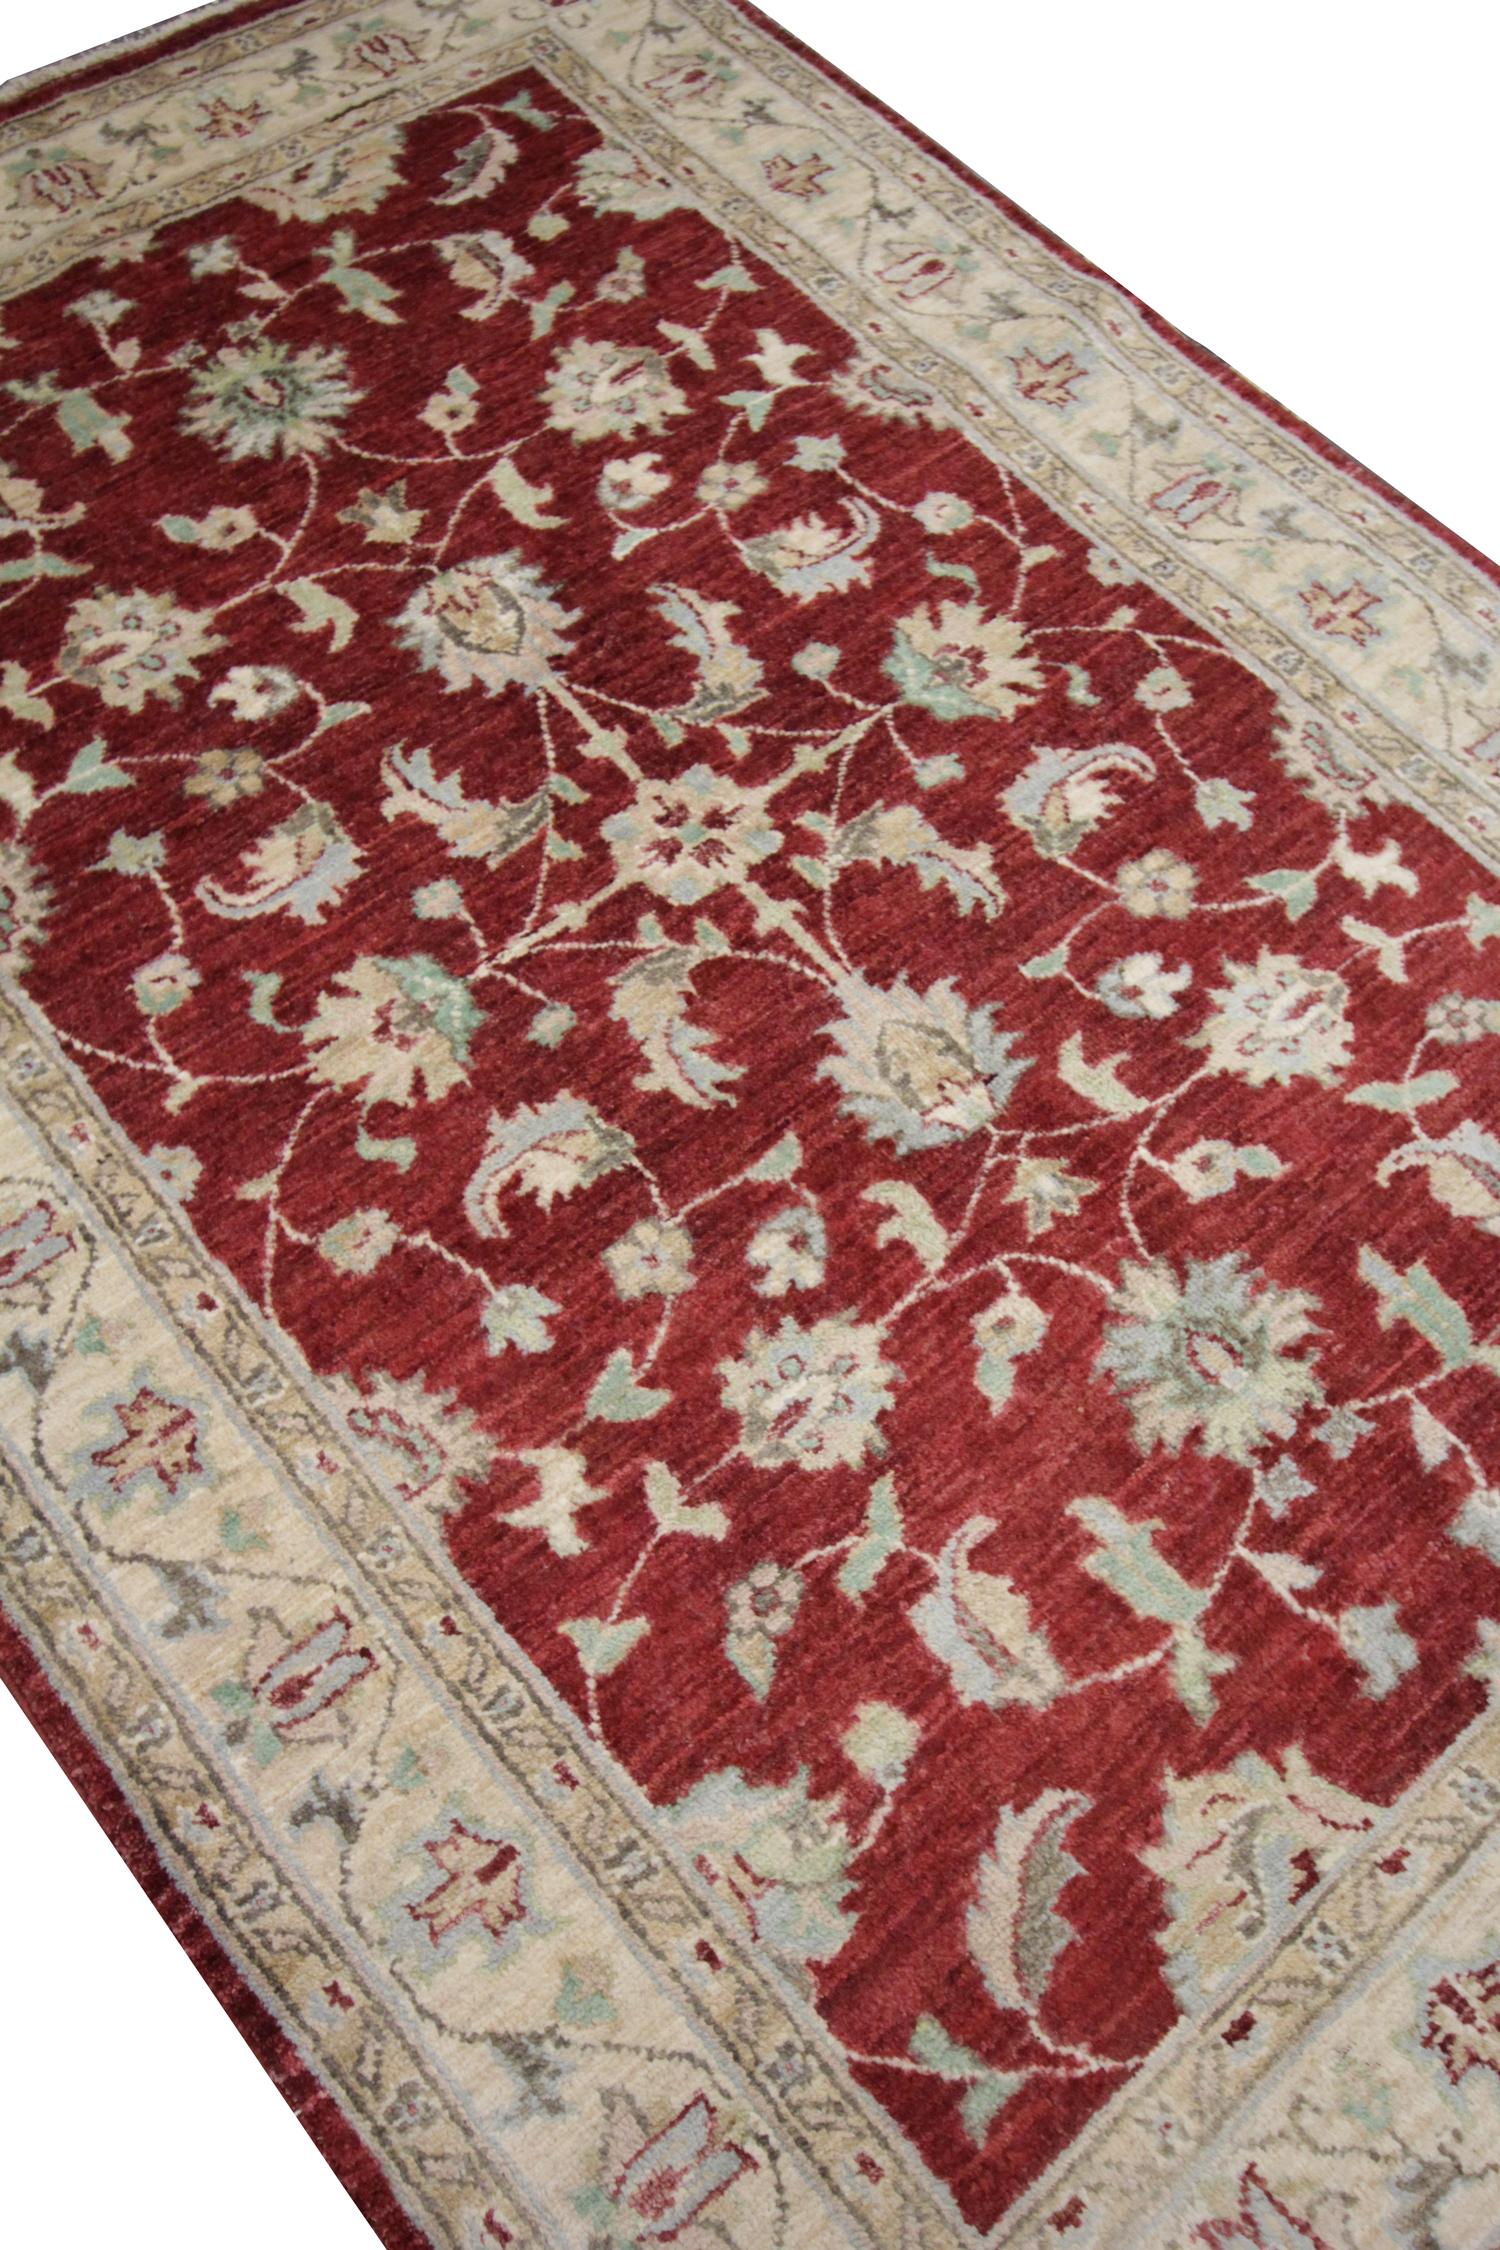 This rich red wool area rug is a fine example of the Ziegler design. Woven by hand in the early 21st century in Pakistan. The design has been woven with a traditional deep red background and cream accents that make up the decorative floral pattern